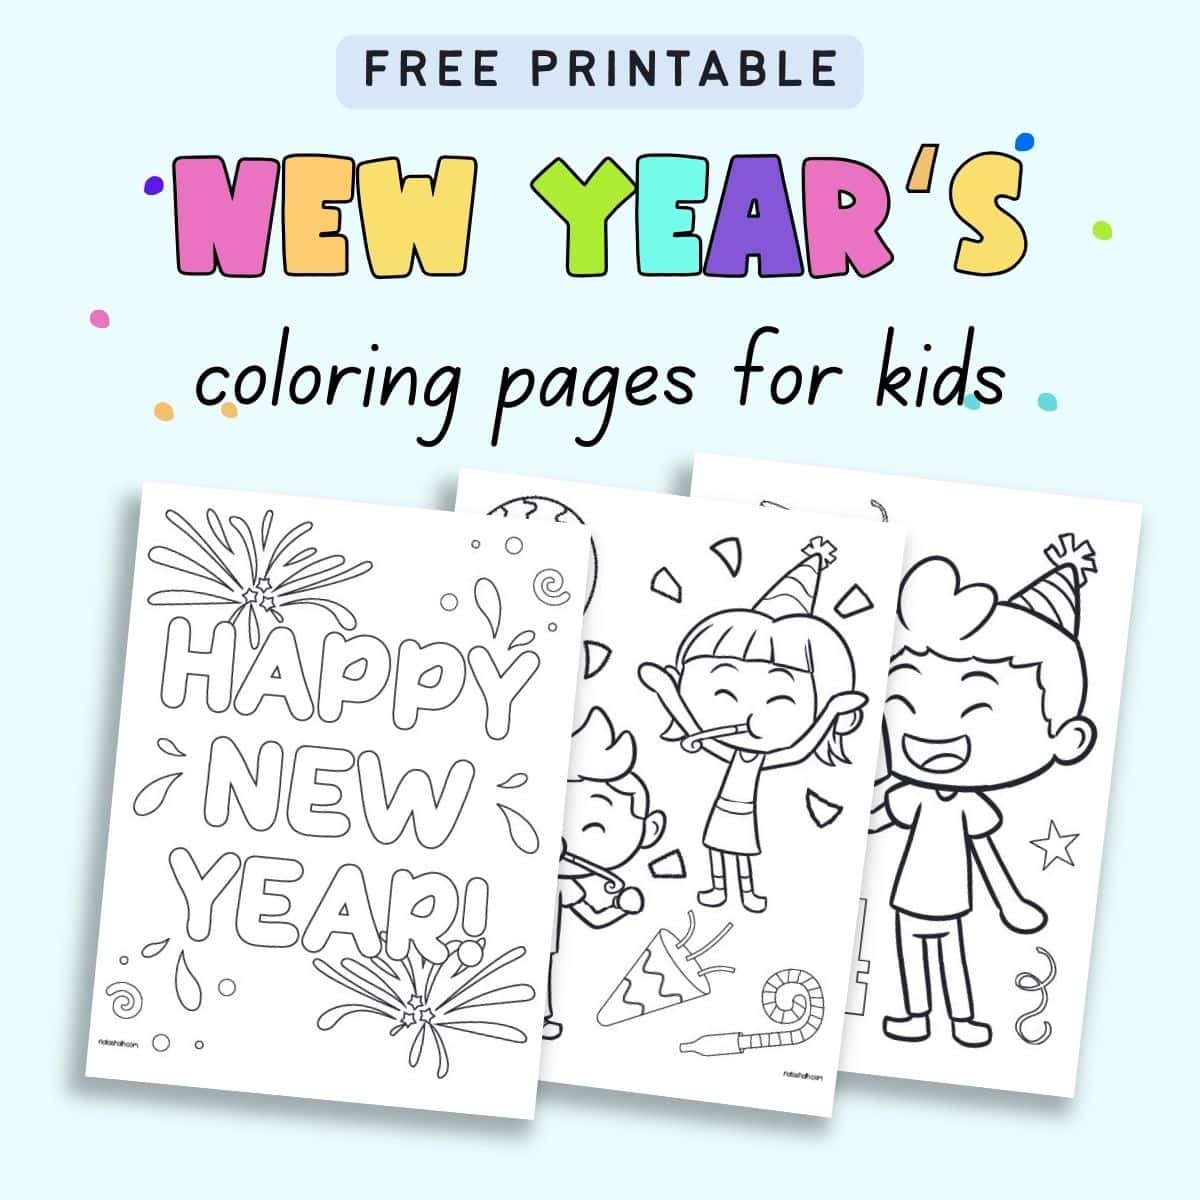 text "free printable New Year's coloring pages for kids" with a preview of three Happy New Year coloring pages